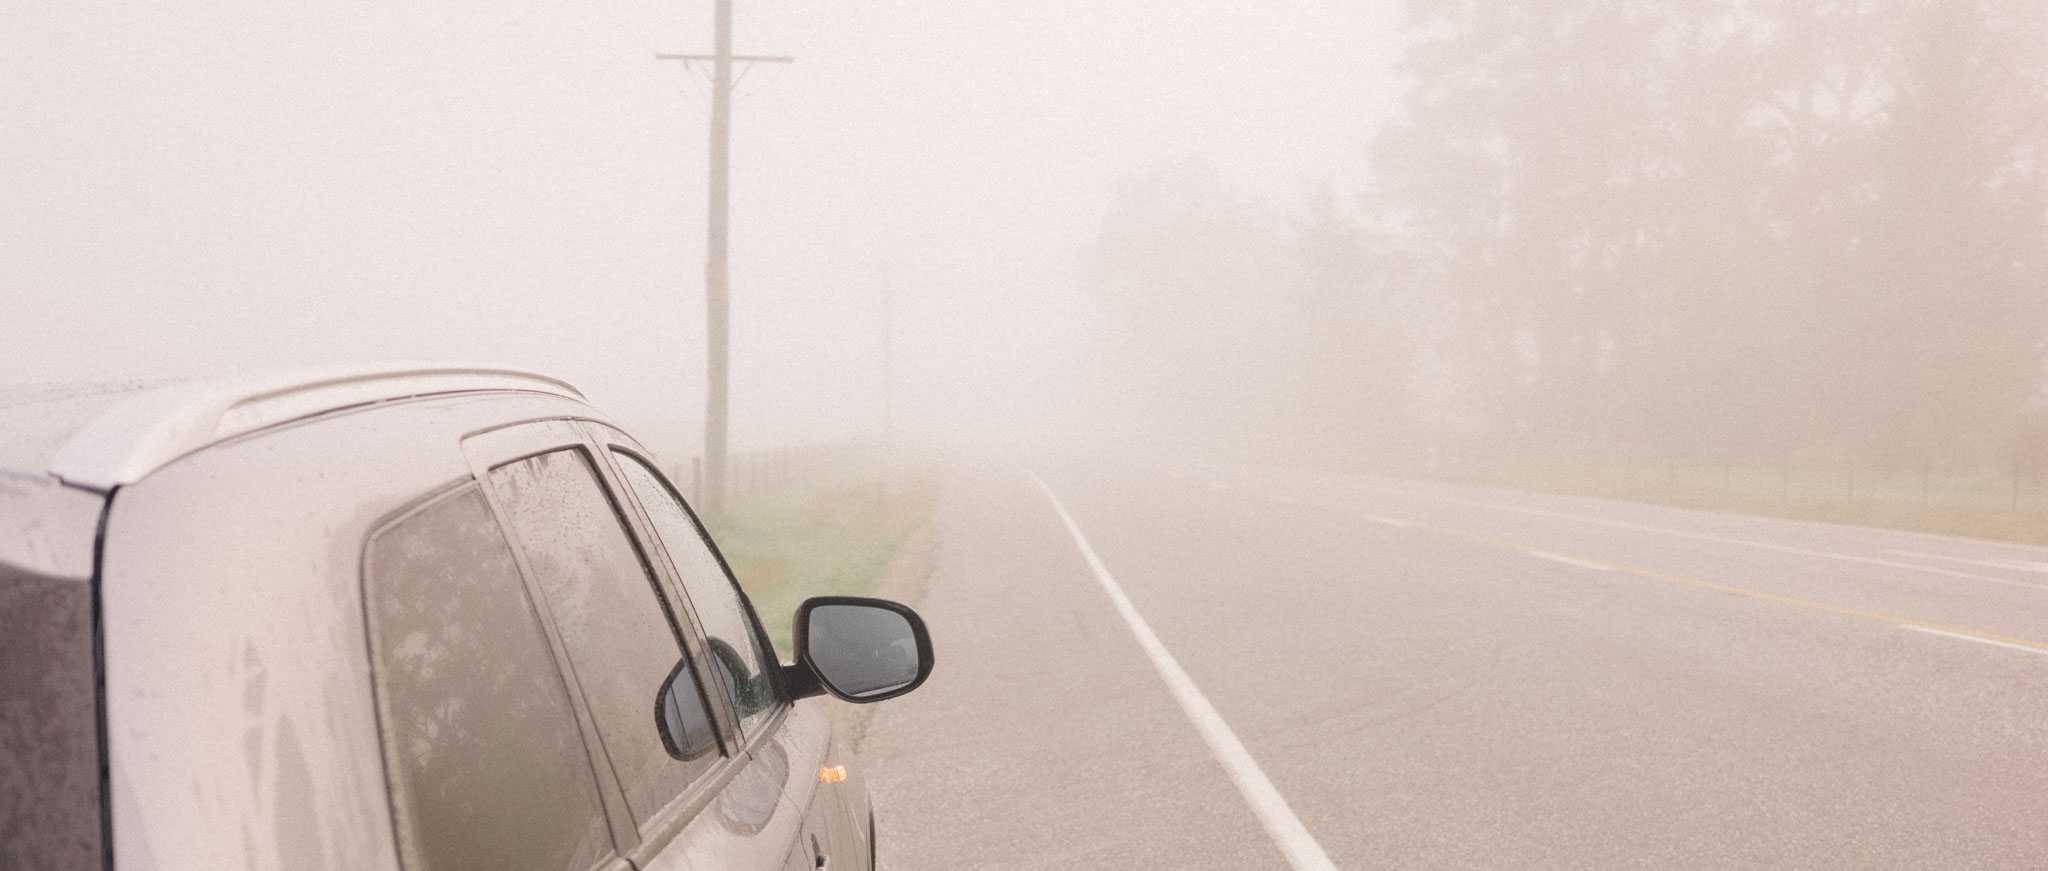 Early-morning driving in heavy fog